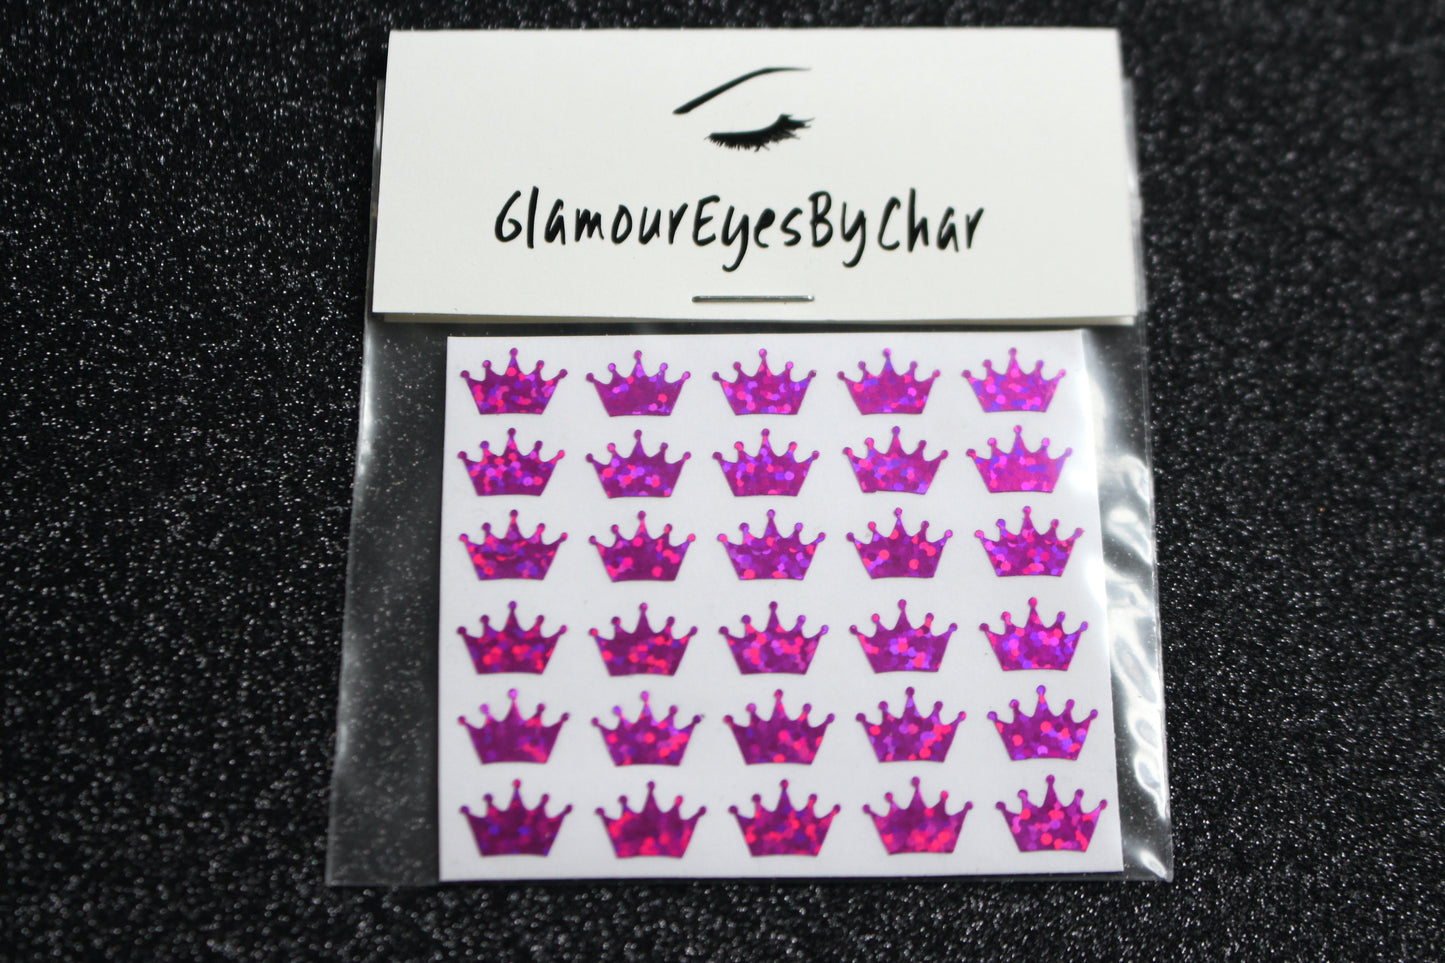 No need to go to the nail salon. Spice up your nails at home with these cute crown nail decals. They can be used on natural or acrylic nails. You can also apply them on top of regular or gel/shellac nail polish. These handmade decals can also be used for body art or any DIY project. Each pack contains 30 decals and is available in 6 different colours.  Tip: Apply some of our glitter on your nails to really GLAMOUREYES your look.  